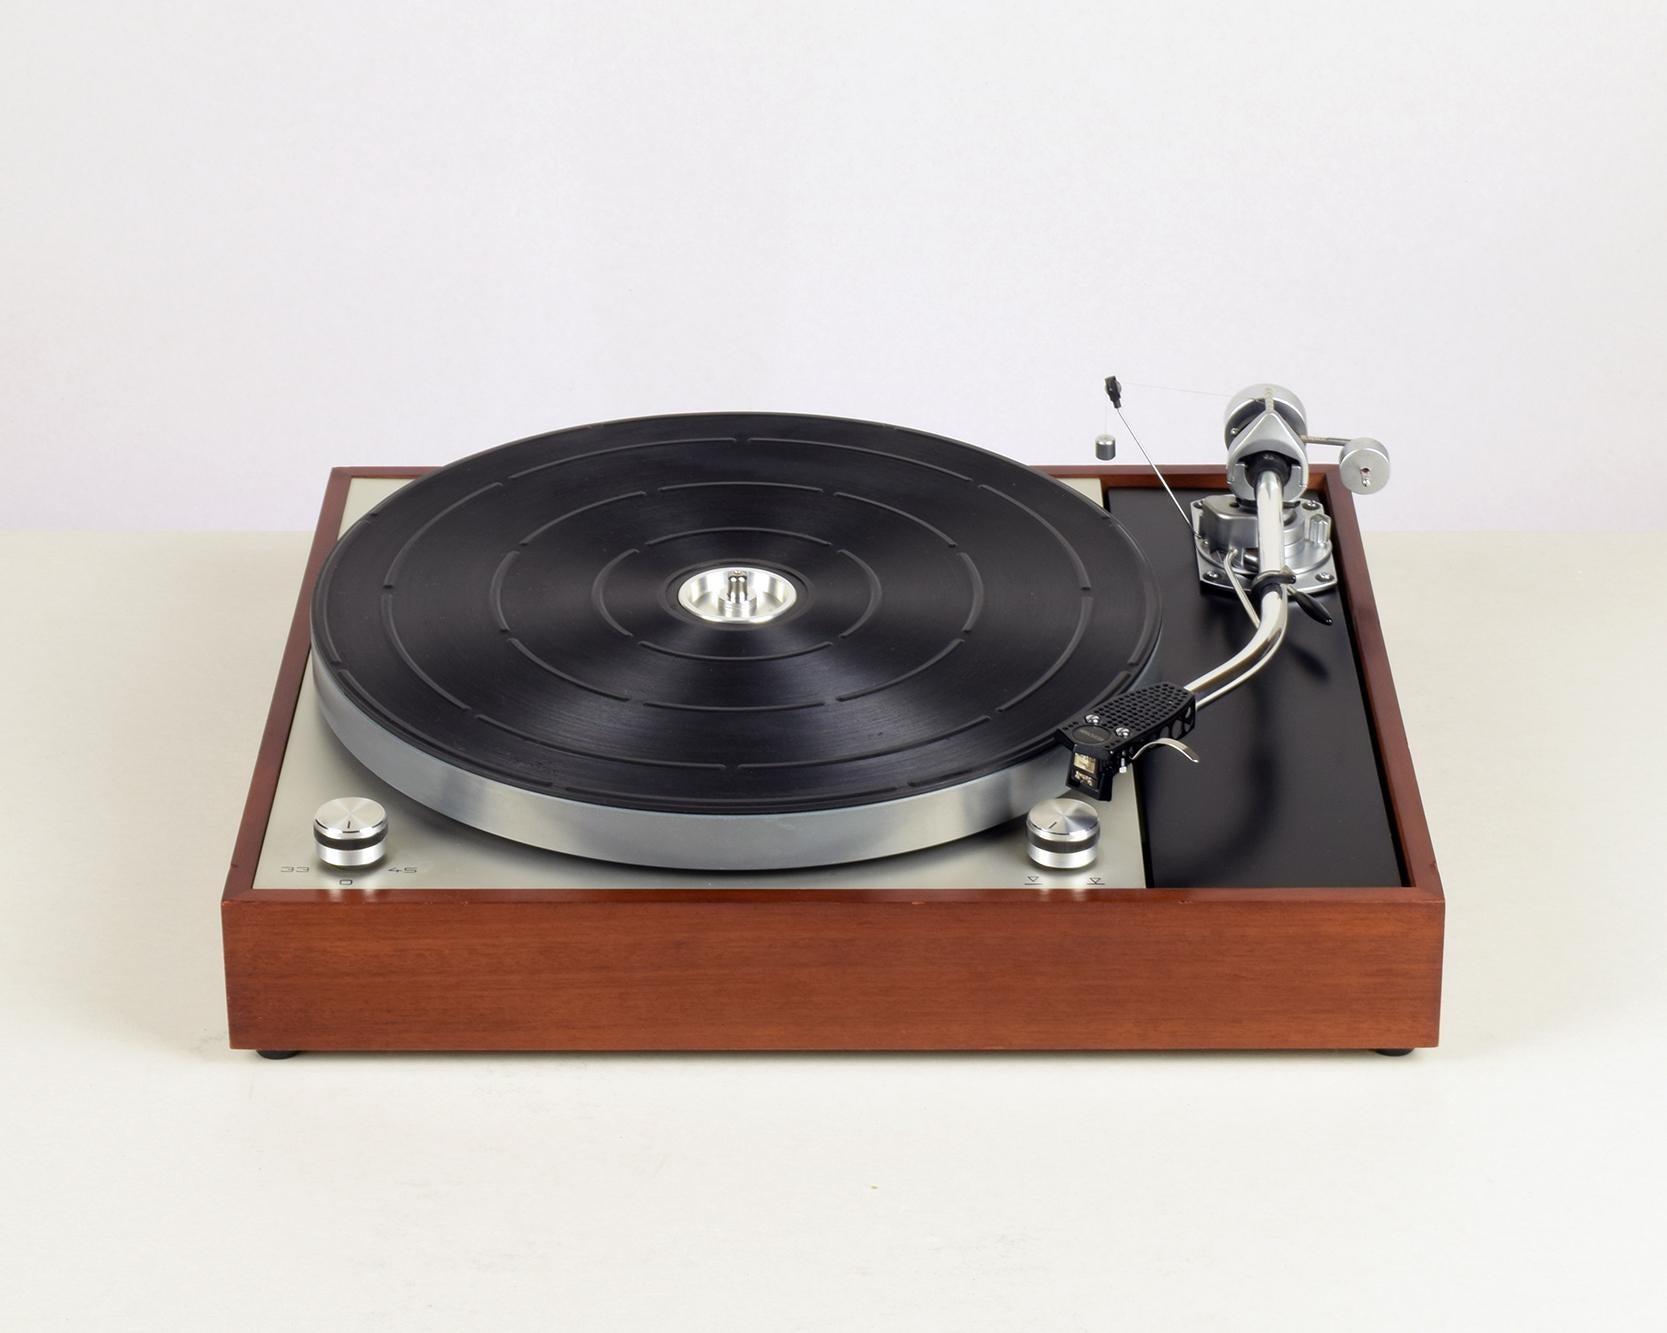 Thorens TD 150 Mk II turntable, 1969
Complete with:
SME 3009 series 2 improved fixed head shell tonearm with original cables / RCA plugs;
Shure M75ED type 2 cartridge with original ED T2 stylus.

A superb and highly regarded record player with